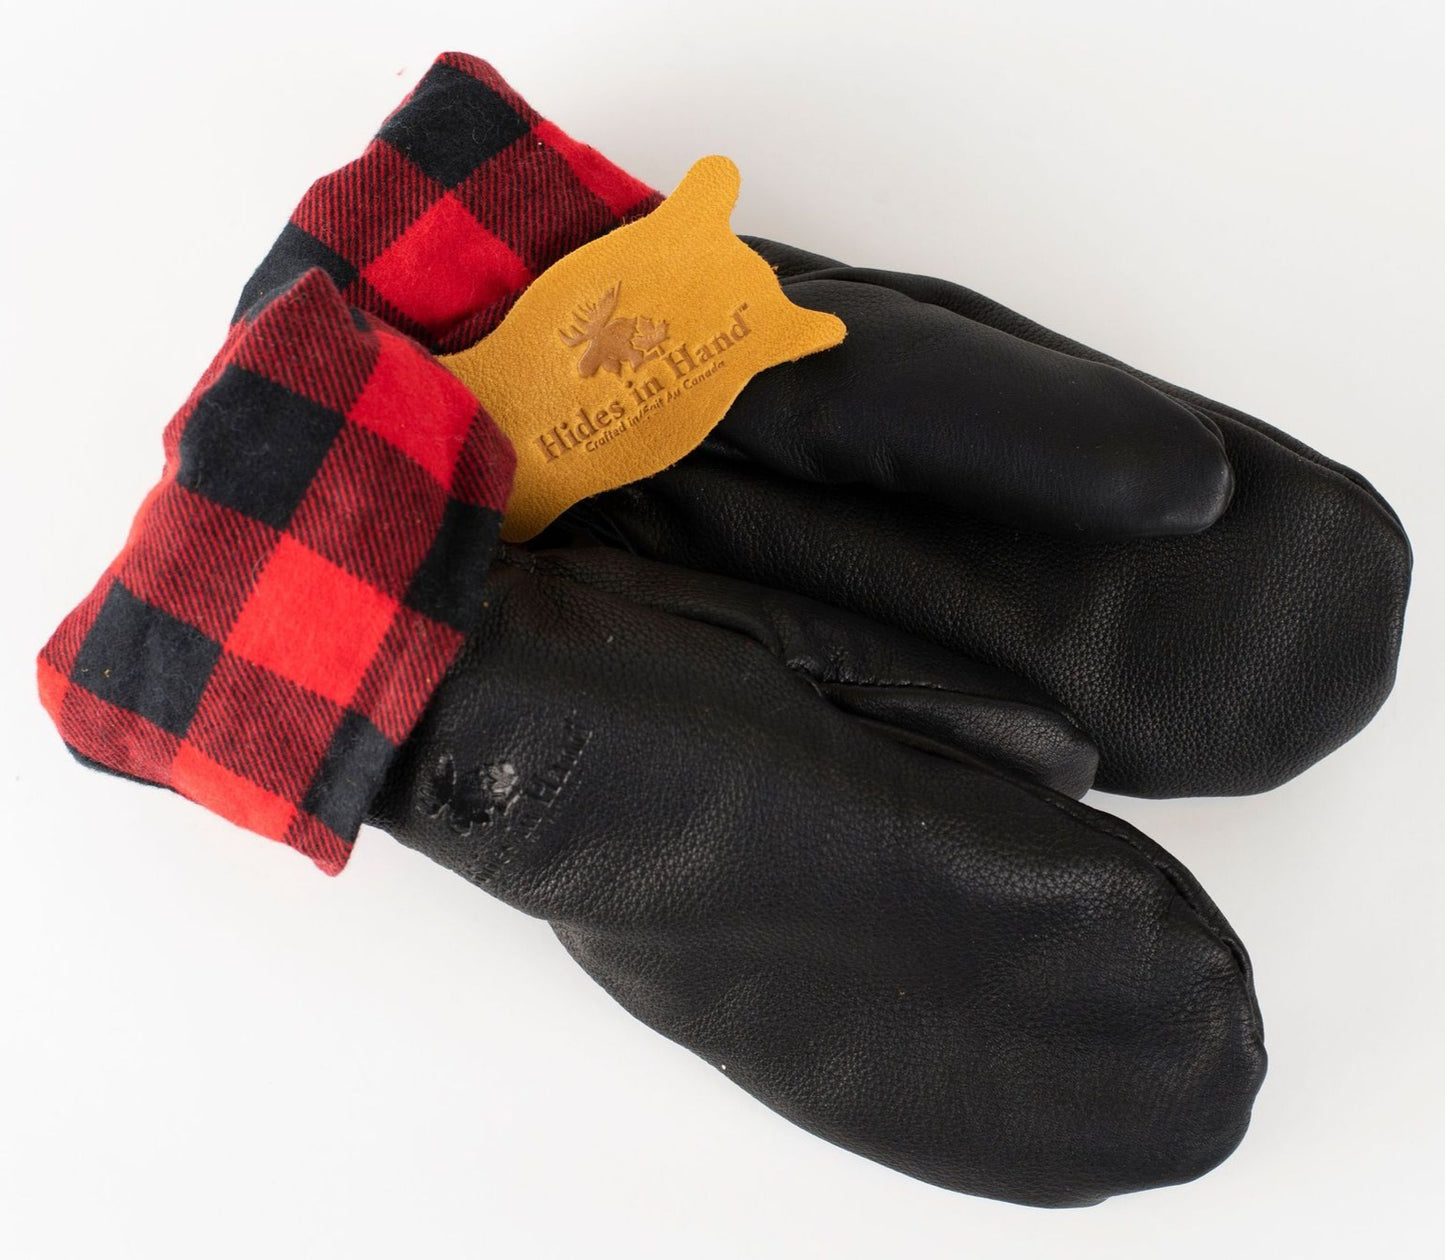 Hides in Hand - Deerskin Mitts with Plaid Cuff - Black